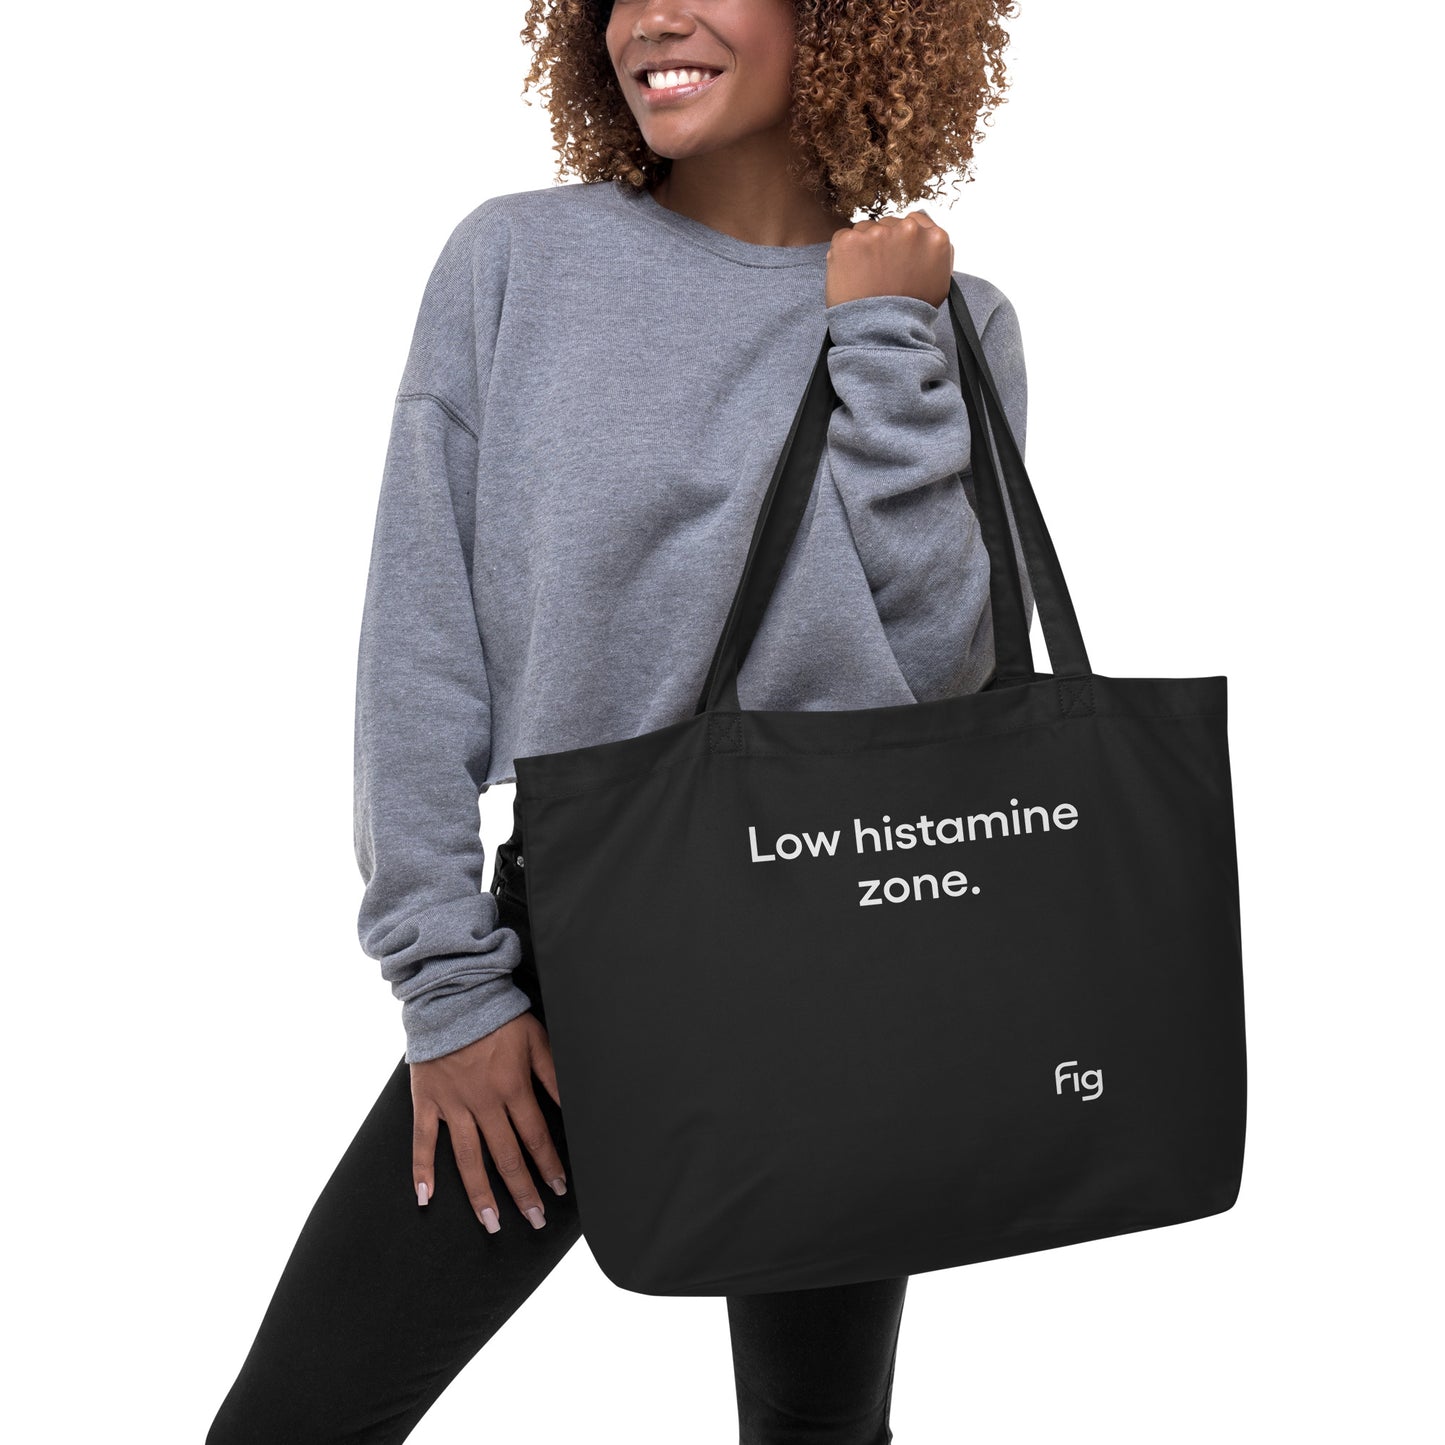 Low histamine zone | Large organic tote bag